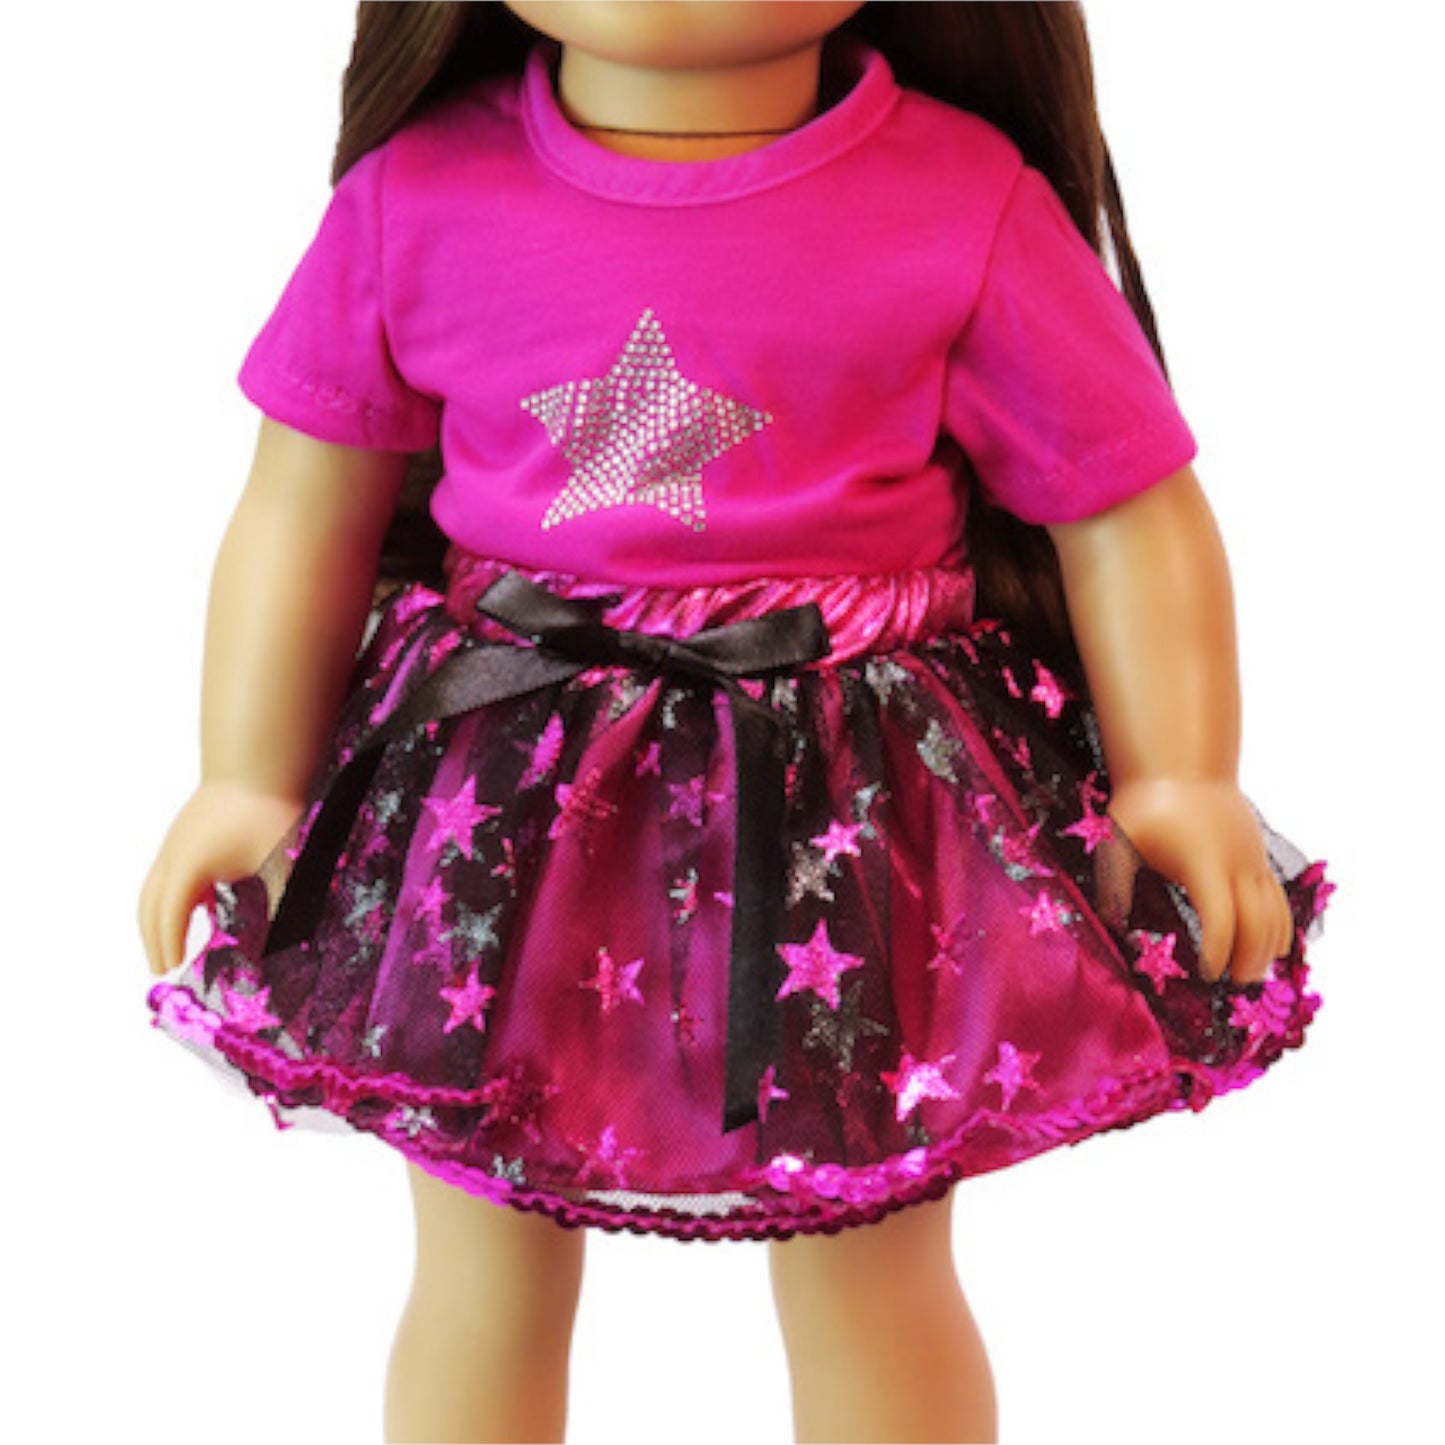 Super Star Tutu Skirt Set for 18-inch dolls with doll Up Close